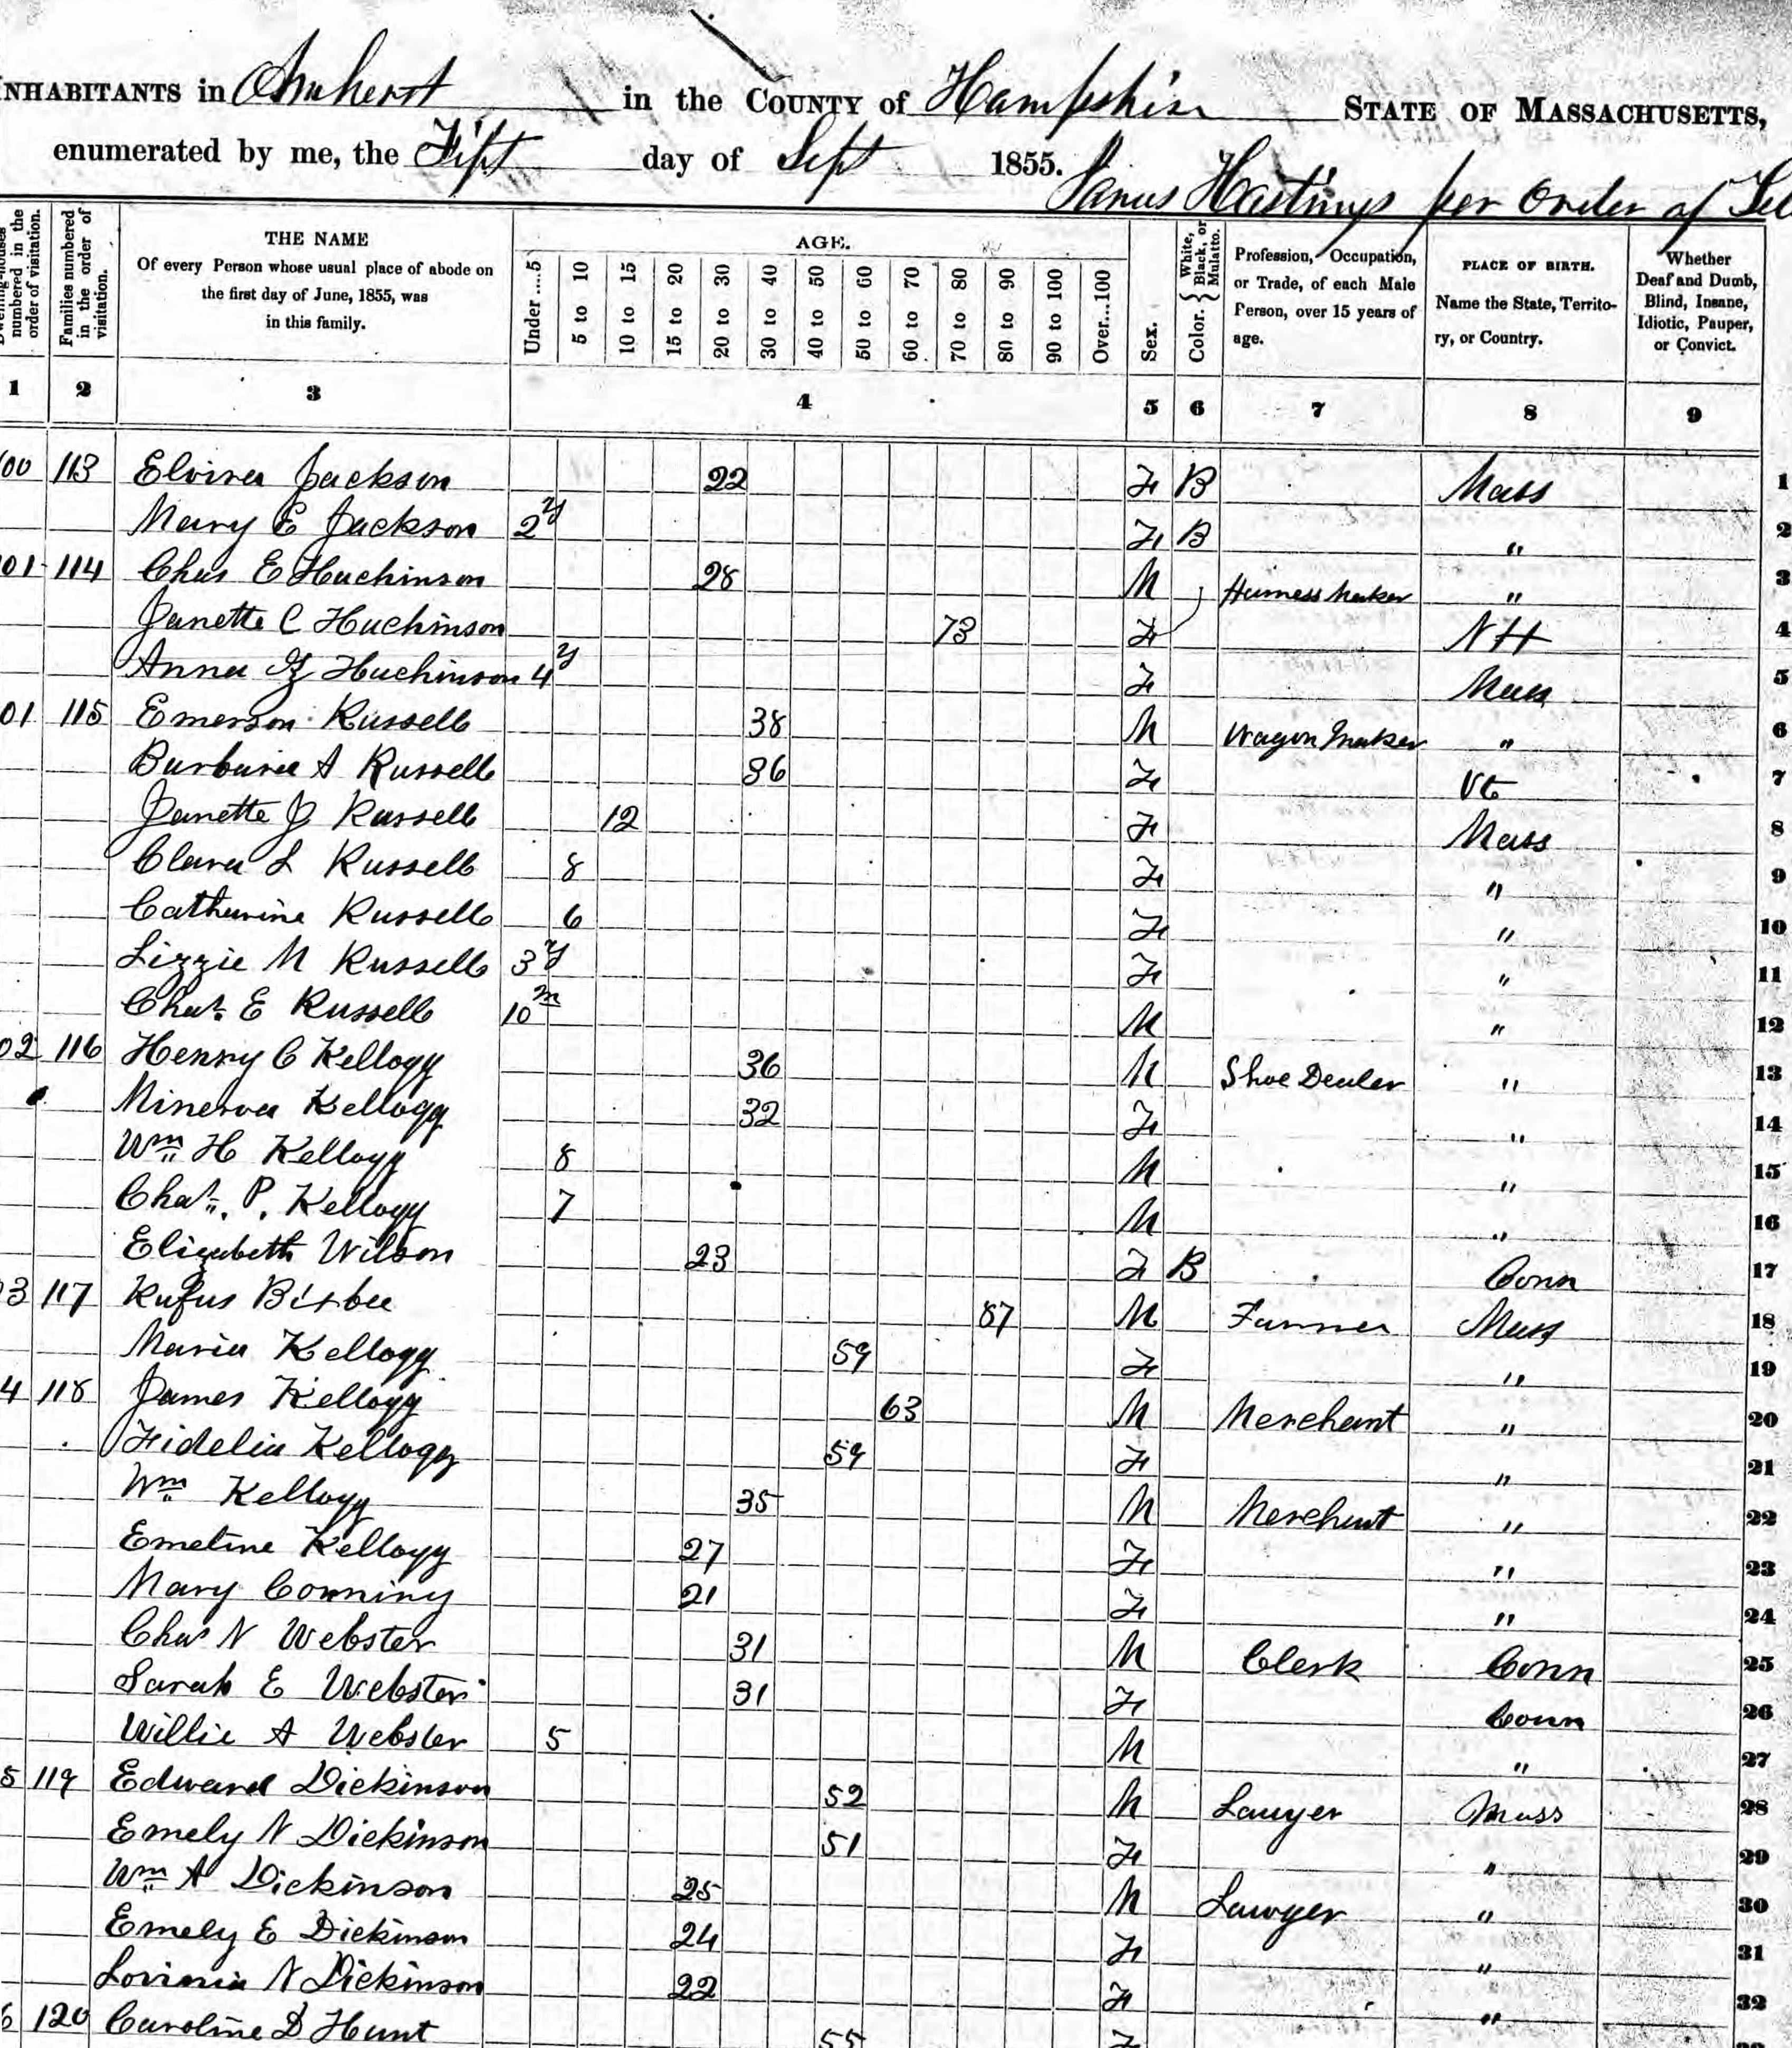 1855 census showing Henry Chester Kellogg's family, his Kellogg cousins, and the Dickinsons.